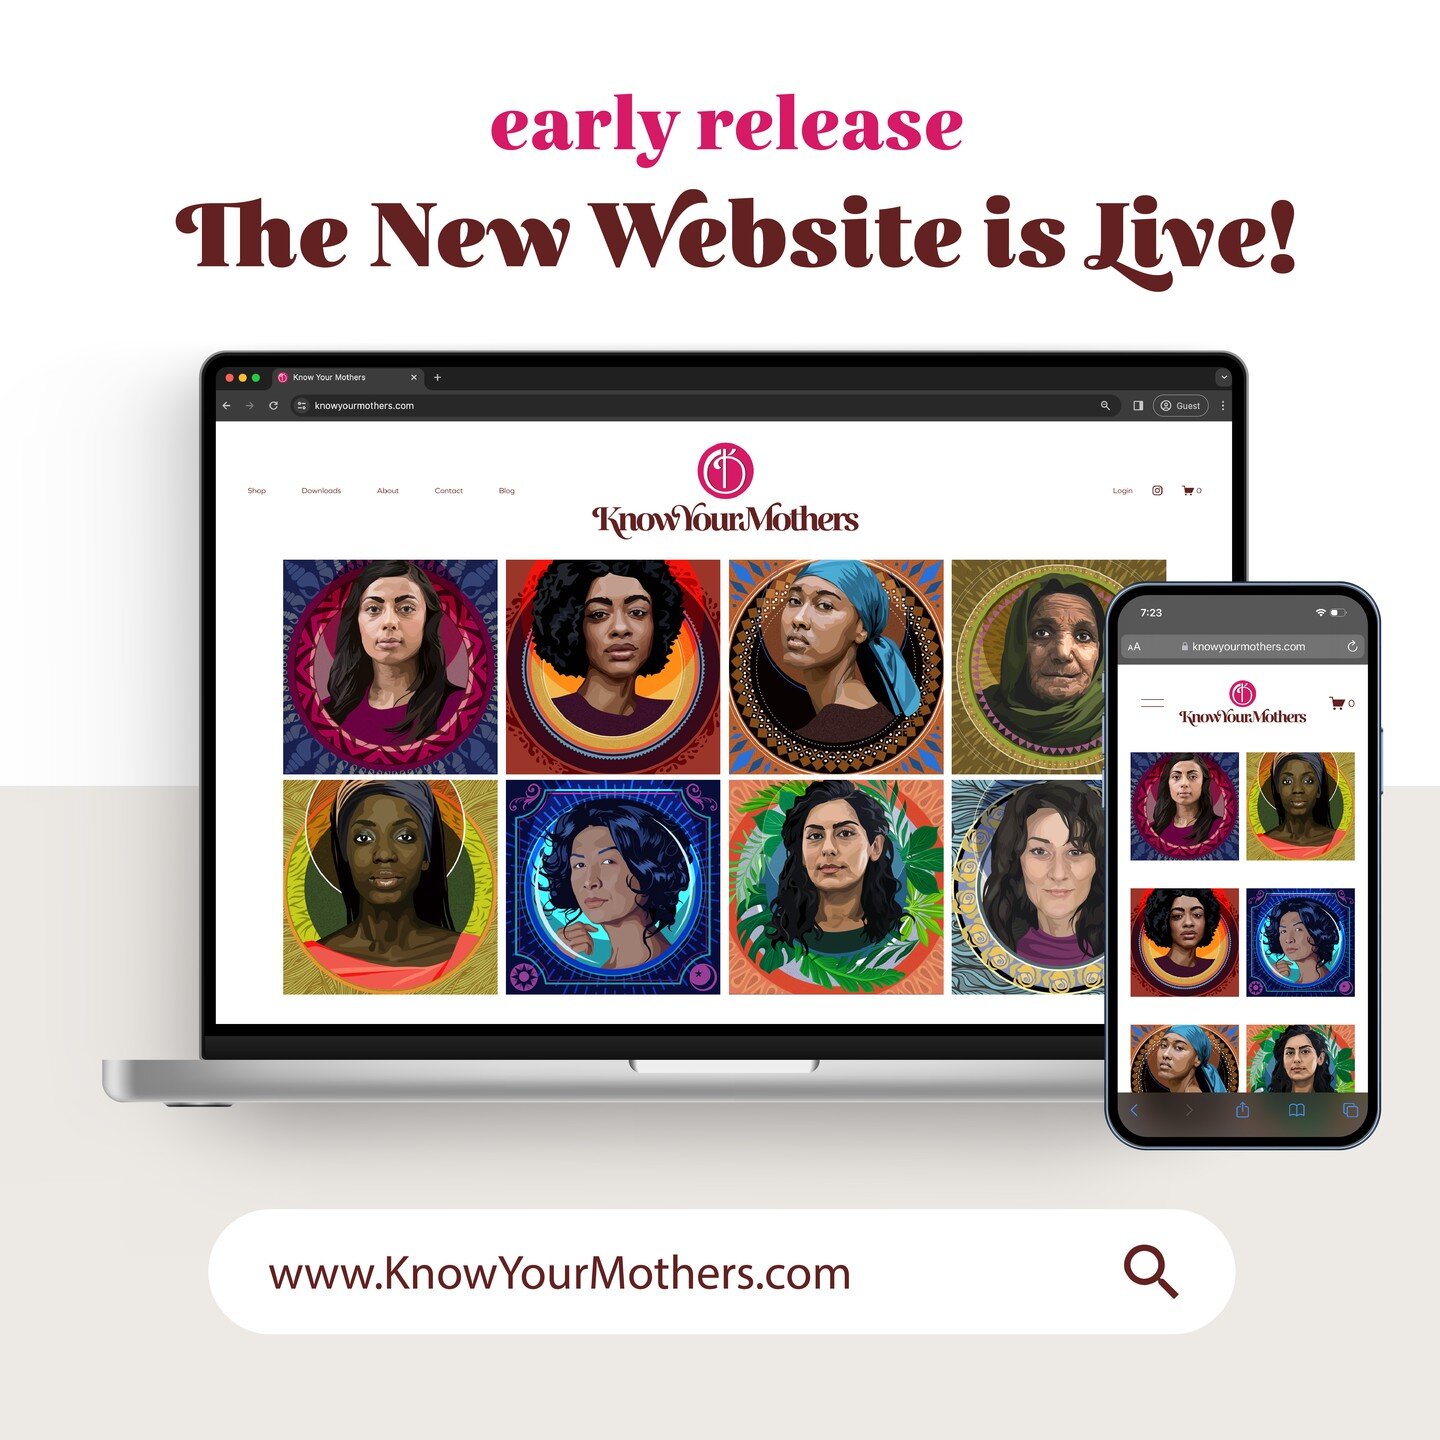 I&rsquo;m so excited to announce the LAUNCH of the NEW Know Your Mothers website!

✨ KnowYourMothers.com ✨

The biggest change to this site (from the old) is the addition of a SHOP! The shop has physical items like prints, prayer cards and gifts, as 